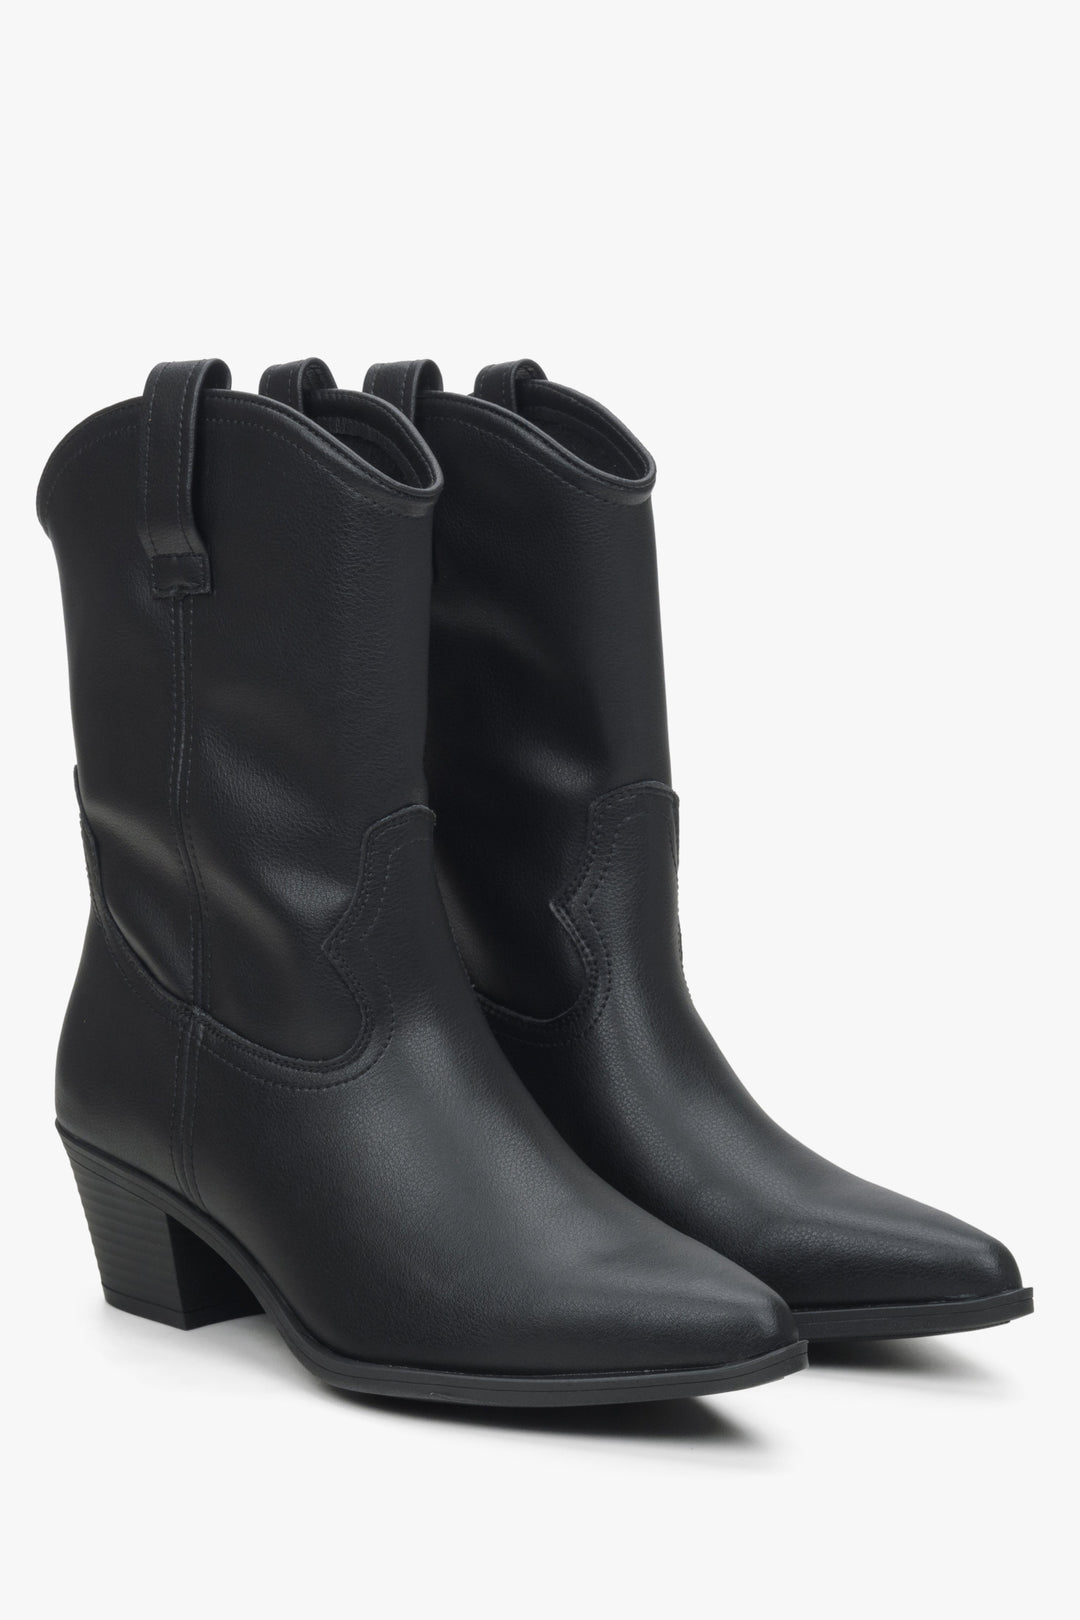 Women's black low-cut cowboy boots made of genuine leather by Estro.